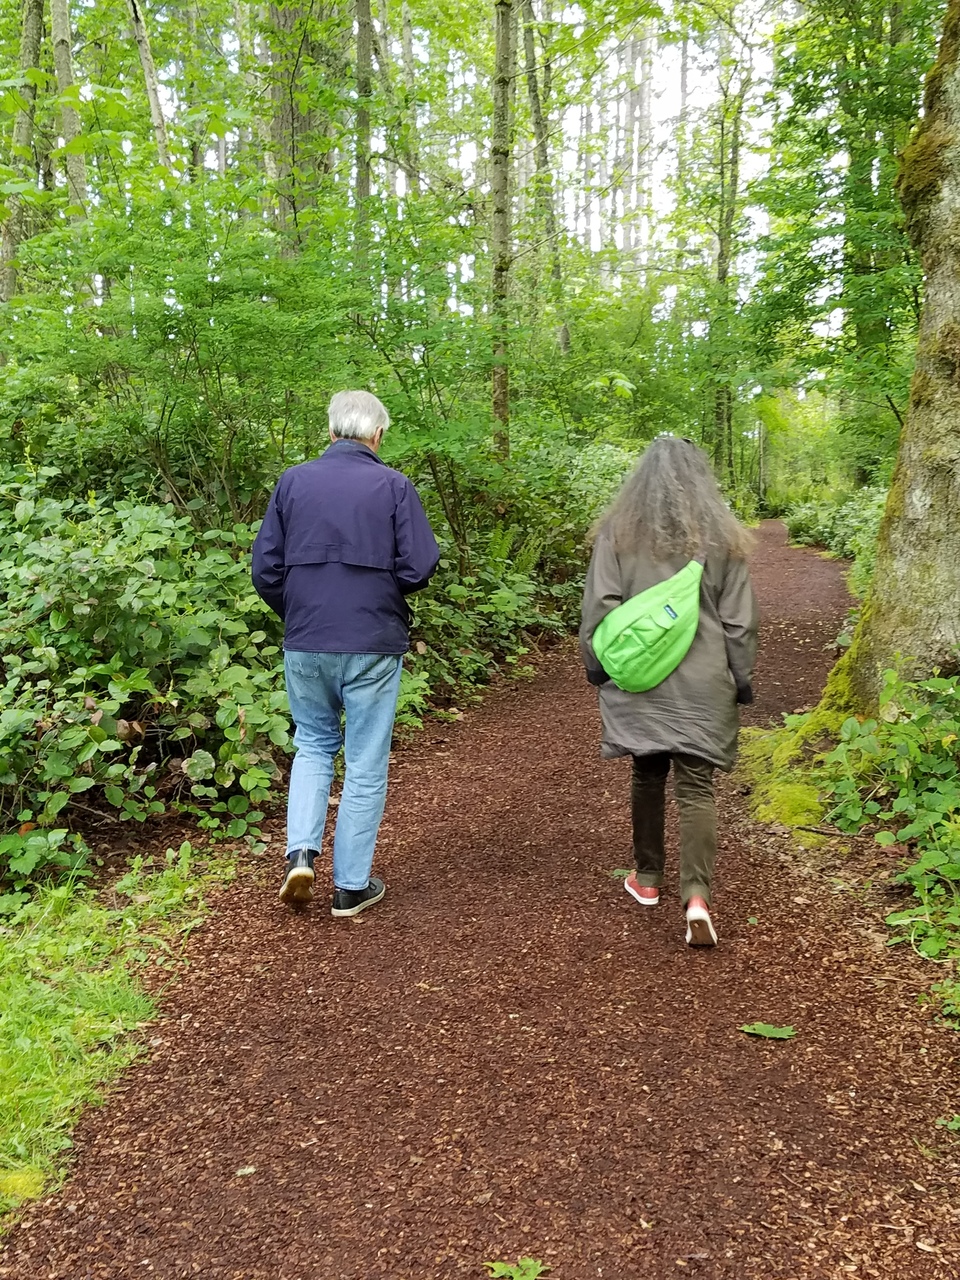 Couple walking down a forested path away from the camera.